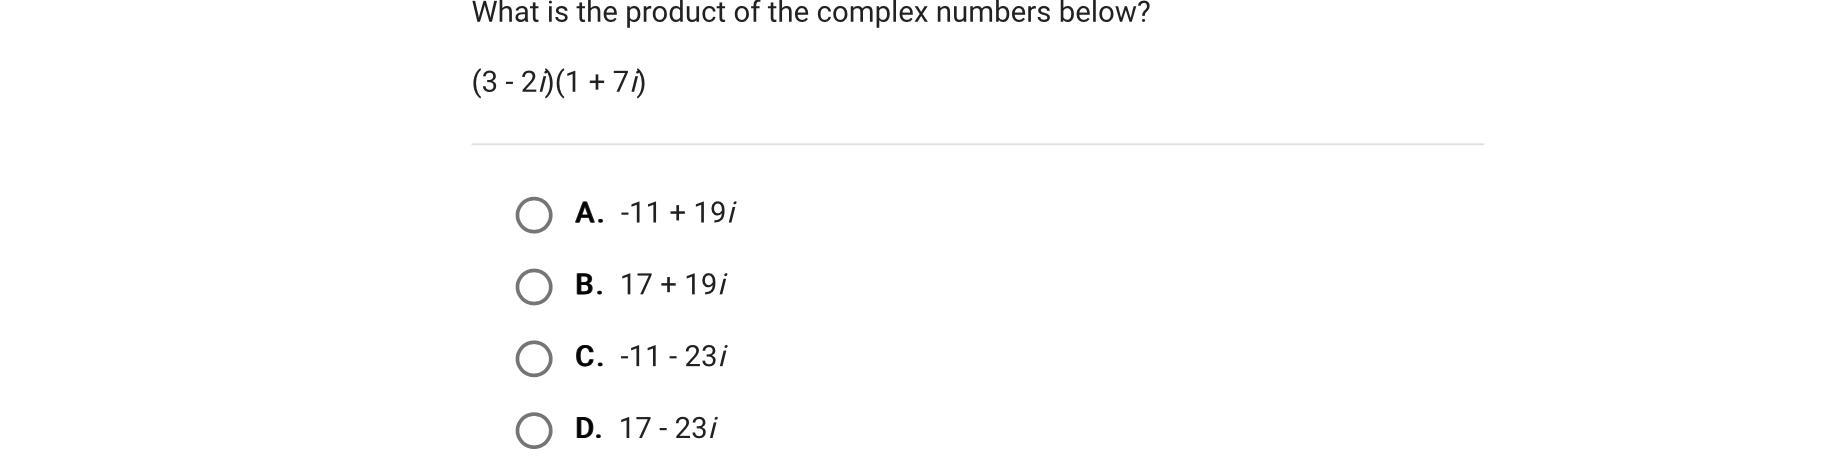 What Is The Product Of The Complex Numbers Below?(3 - 2i)(1 + 7i)A.-11 + 19iB.17 + 19iC.-11 - 23iD.17